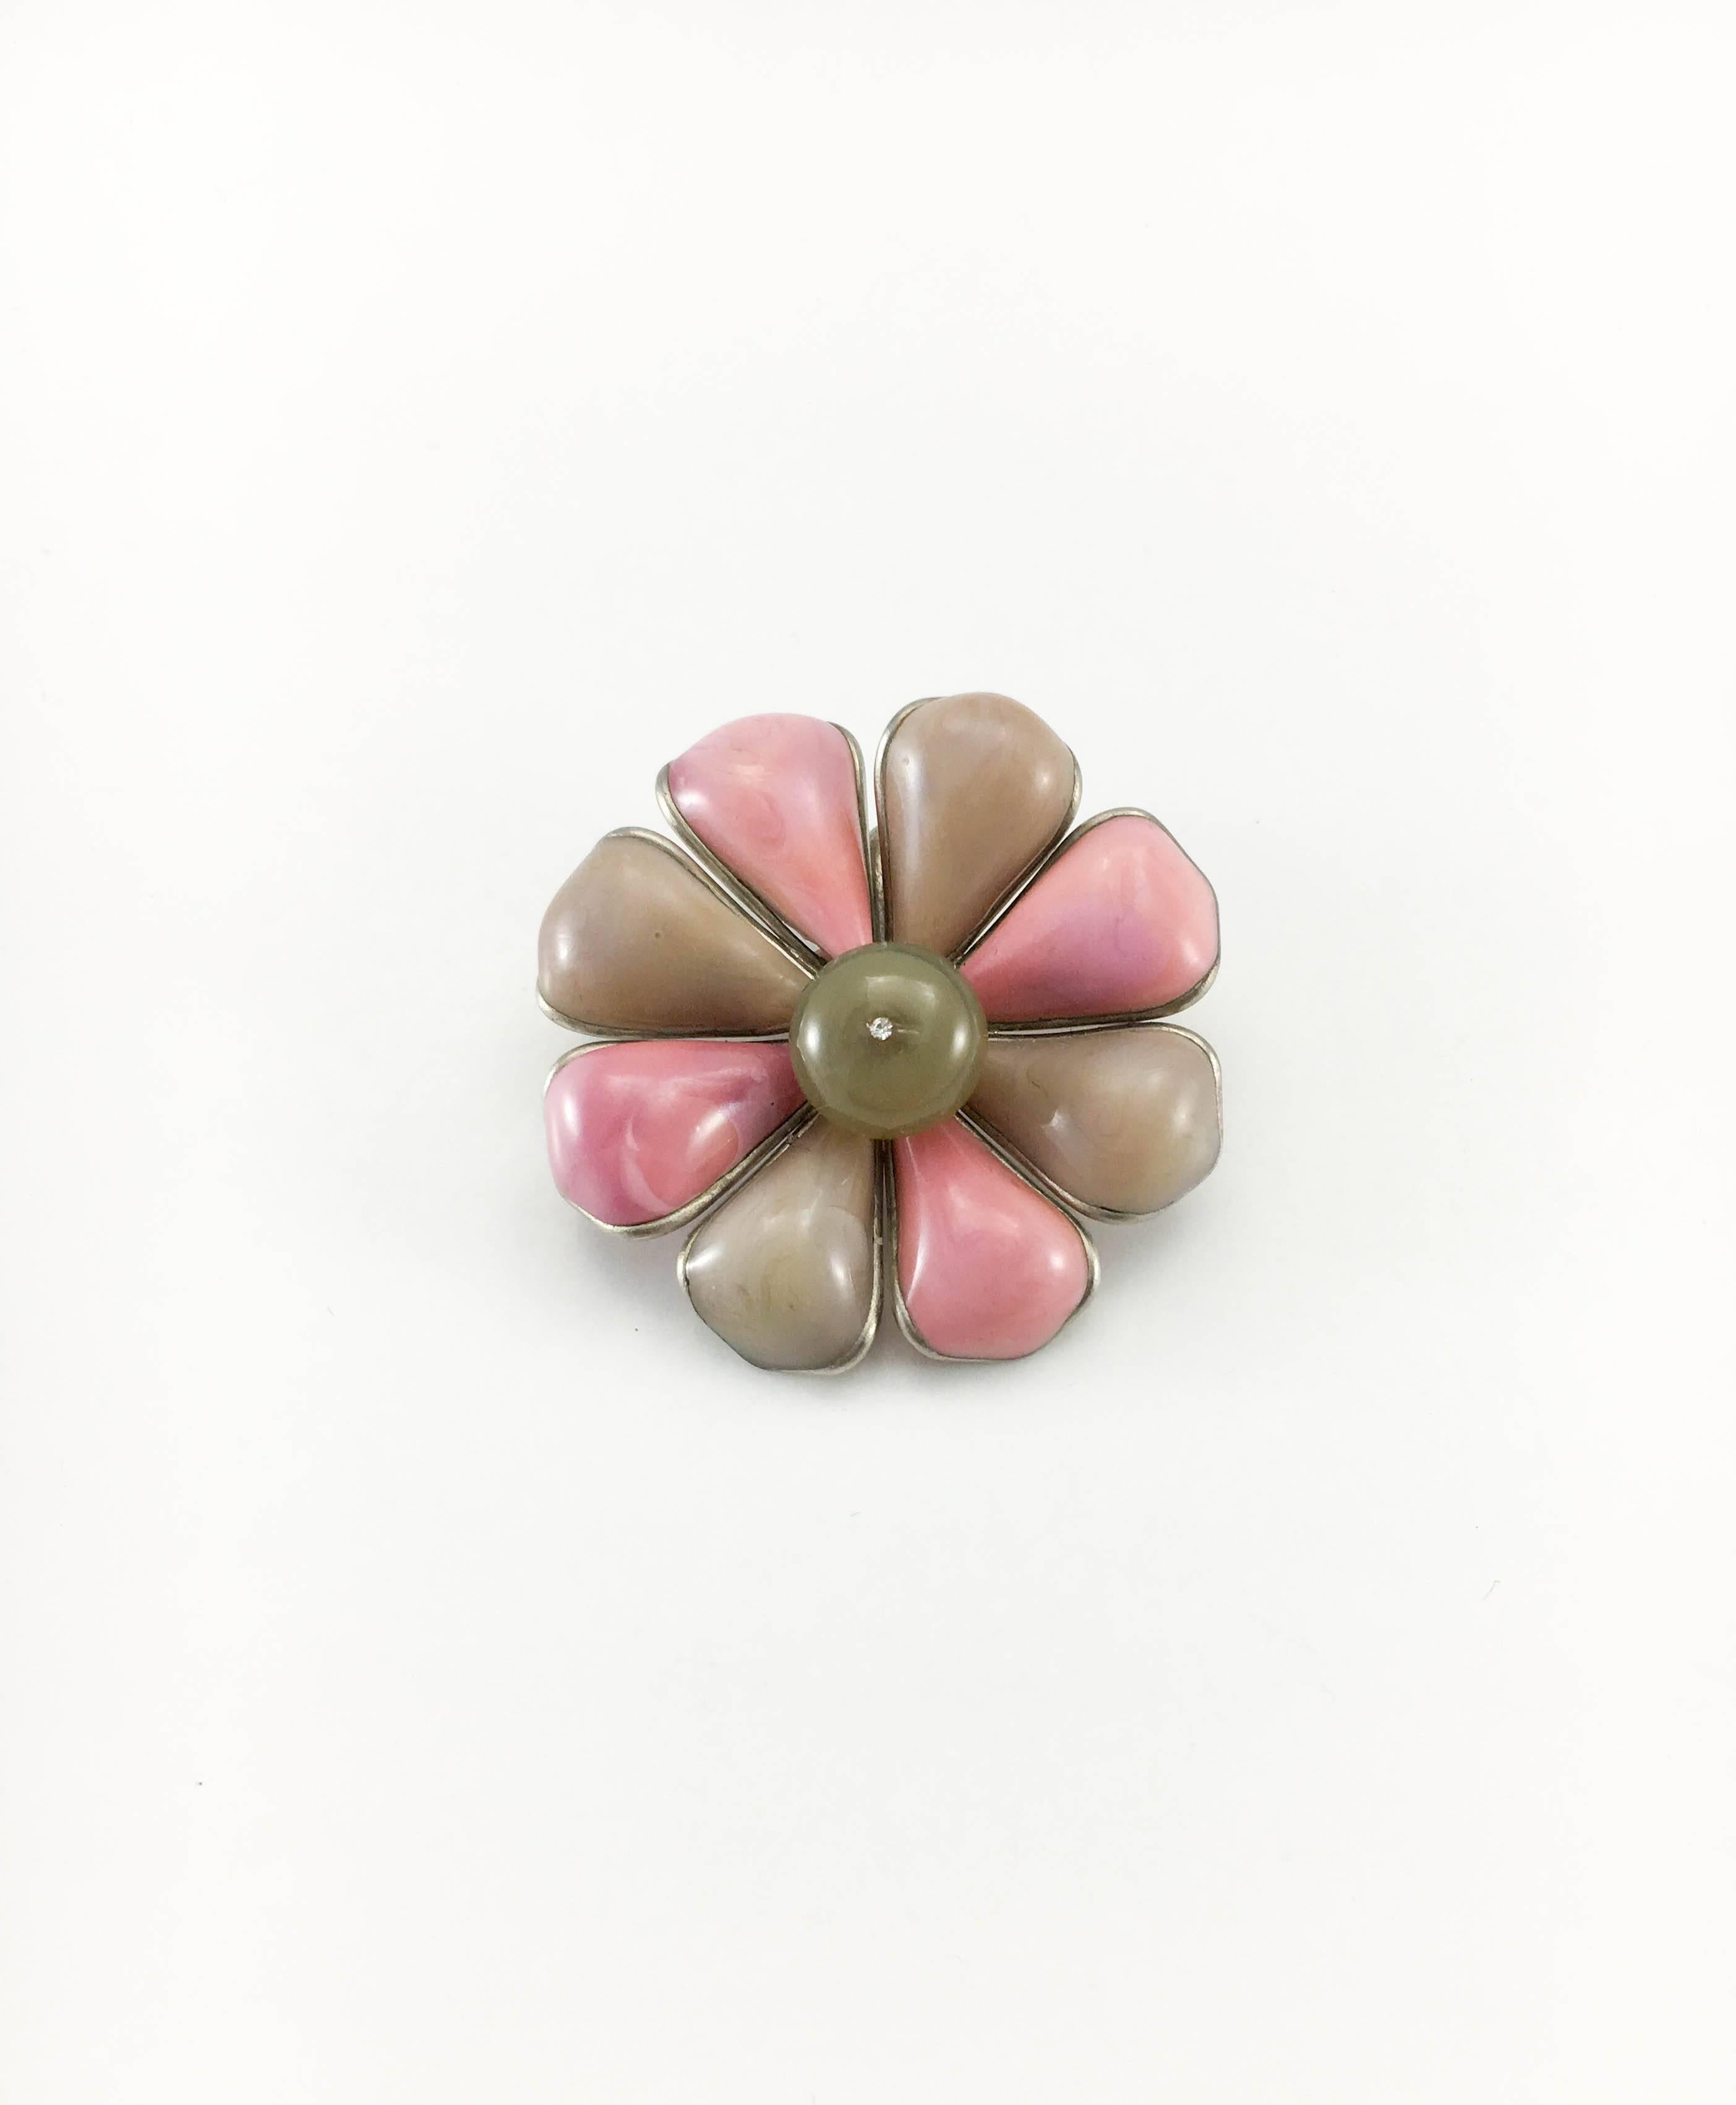 Vintage Chanel Flower Brooch / Pendant. Made in resin, this piece was created for the 1999 Spring / Summer collection. The flower petals are pink and brown, and, in the centre, there is a round brown bead with a rhinestone on top. Versatile, it can